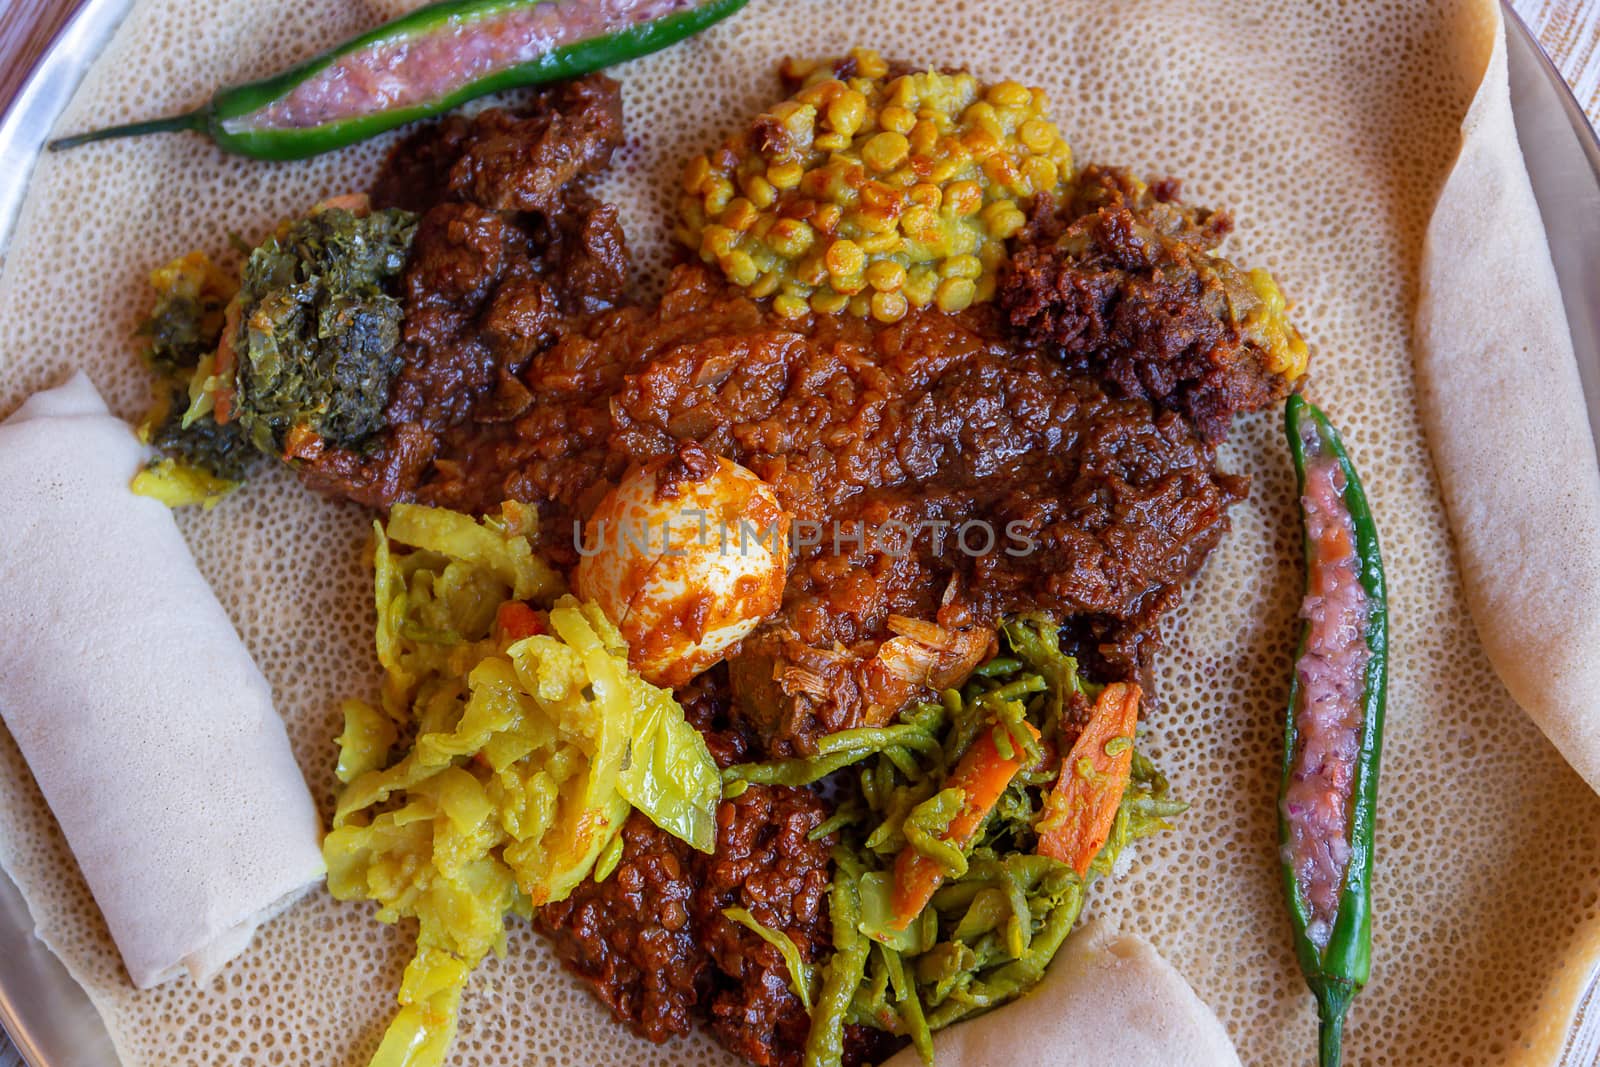 Injera with an assortment of toppings by magicbones